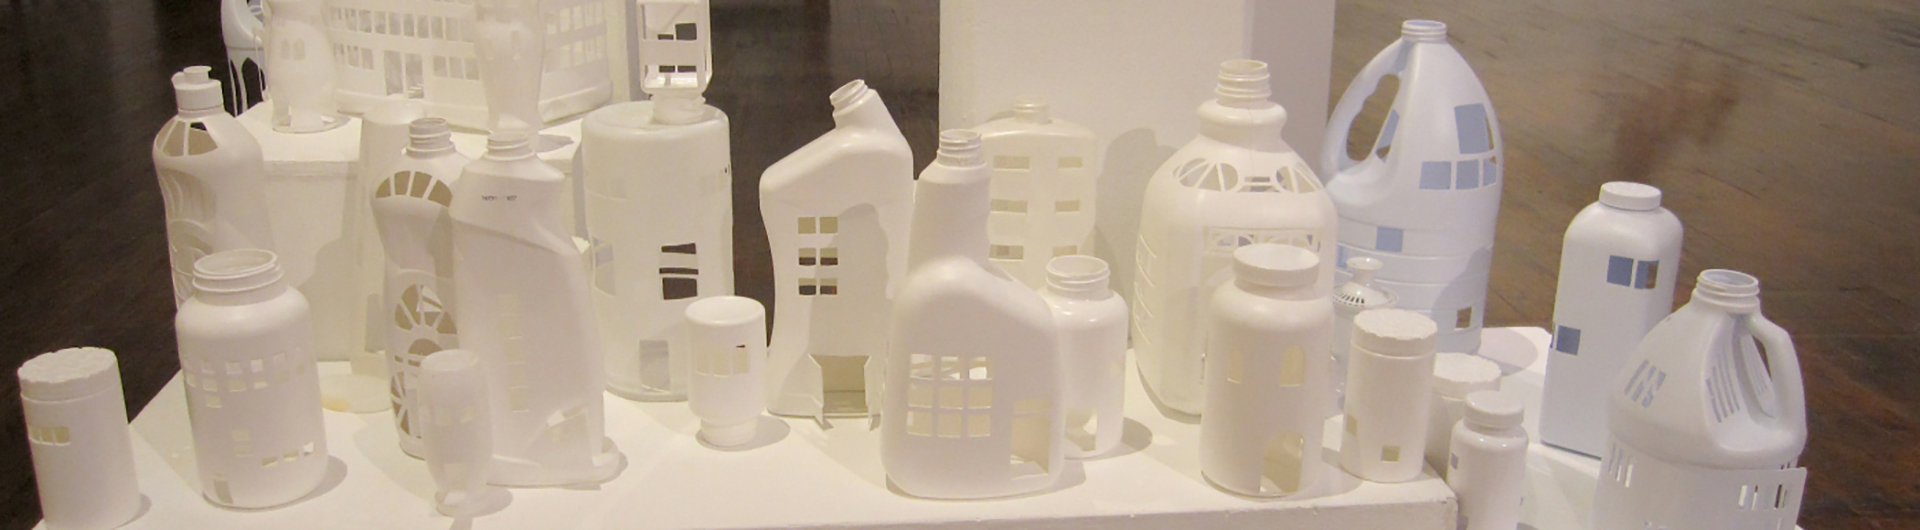 Gallery exhibit of art made from plastic containers